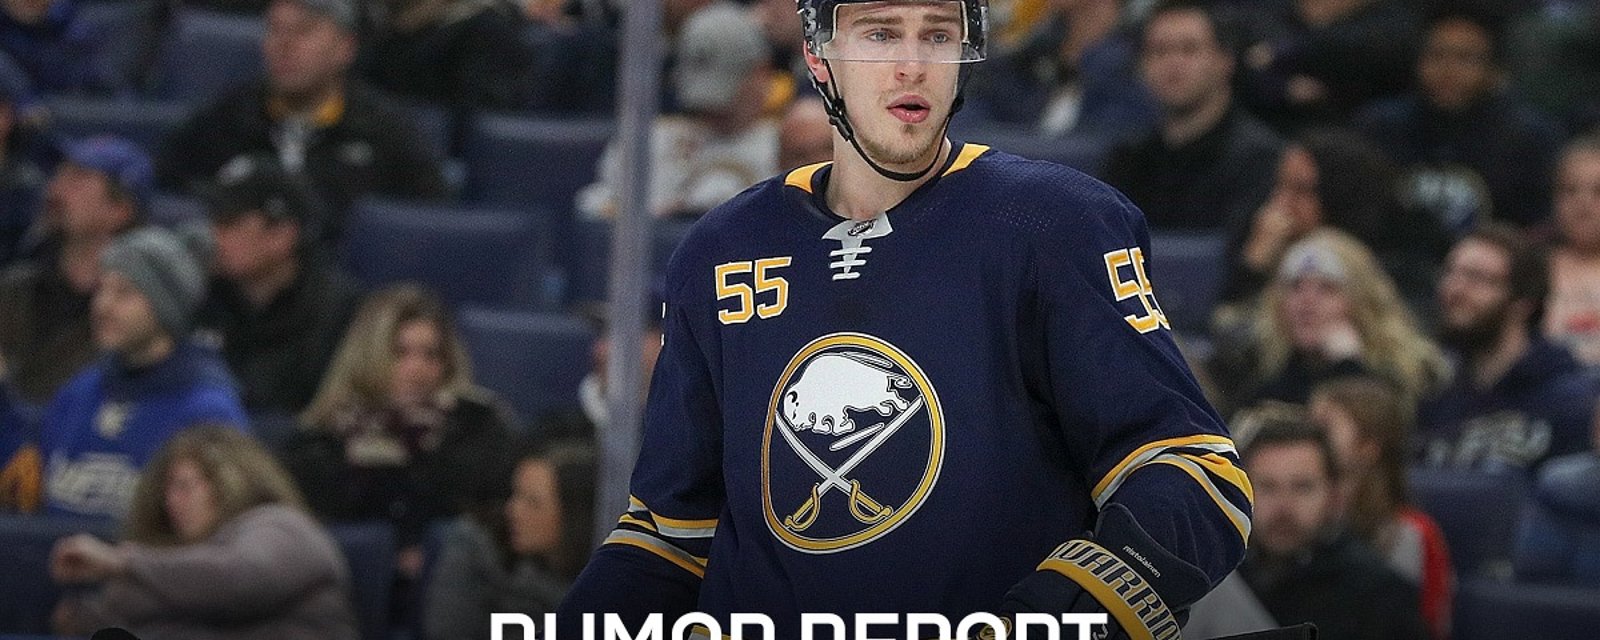 Insider hints at potential trade fit between the Jets and Sabres.